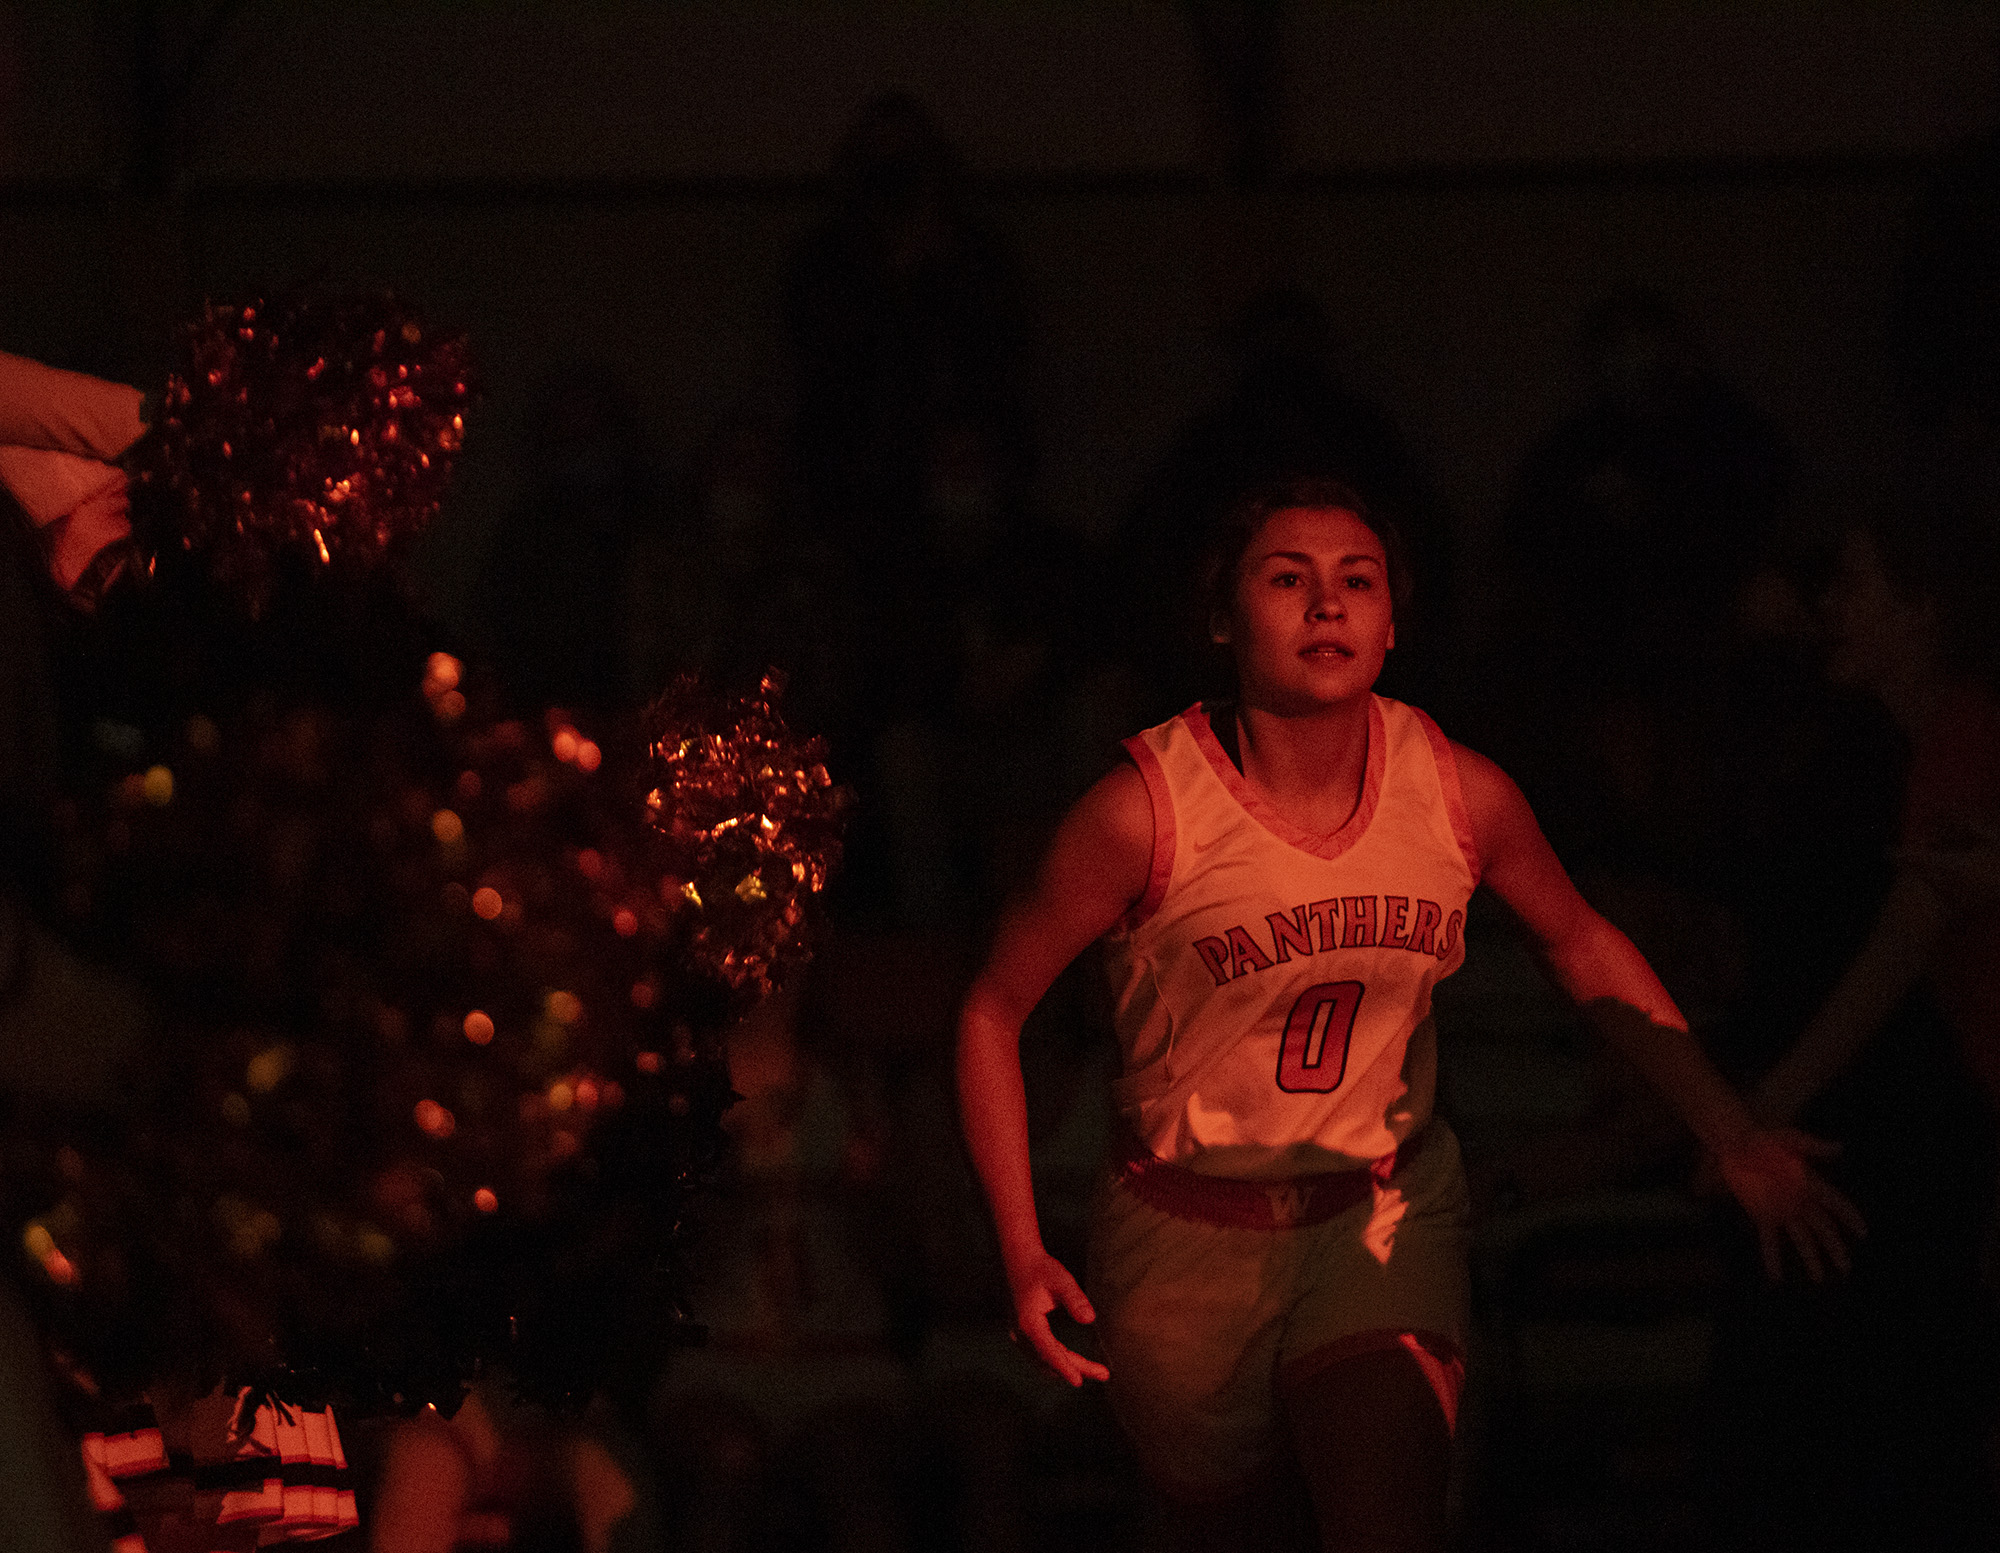 Washougal junior Chloe Johnson runs across the court during pregame introductions on Tuesday, Dec. 14, 2021, before the Panthers’ 57-54 win against Hudson’s Bay at Washougal High School.